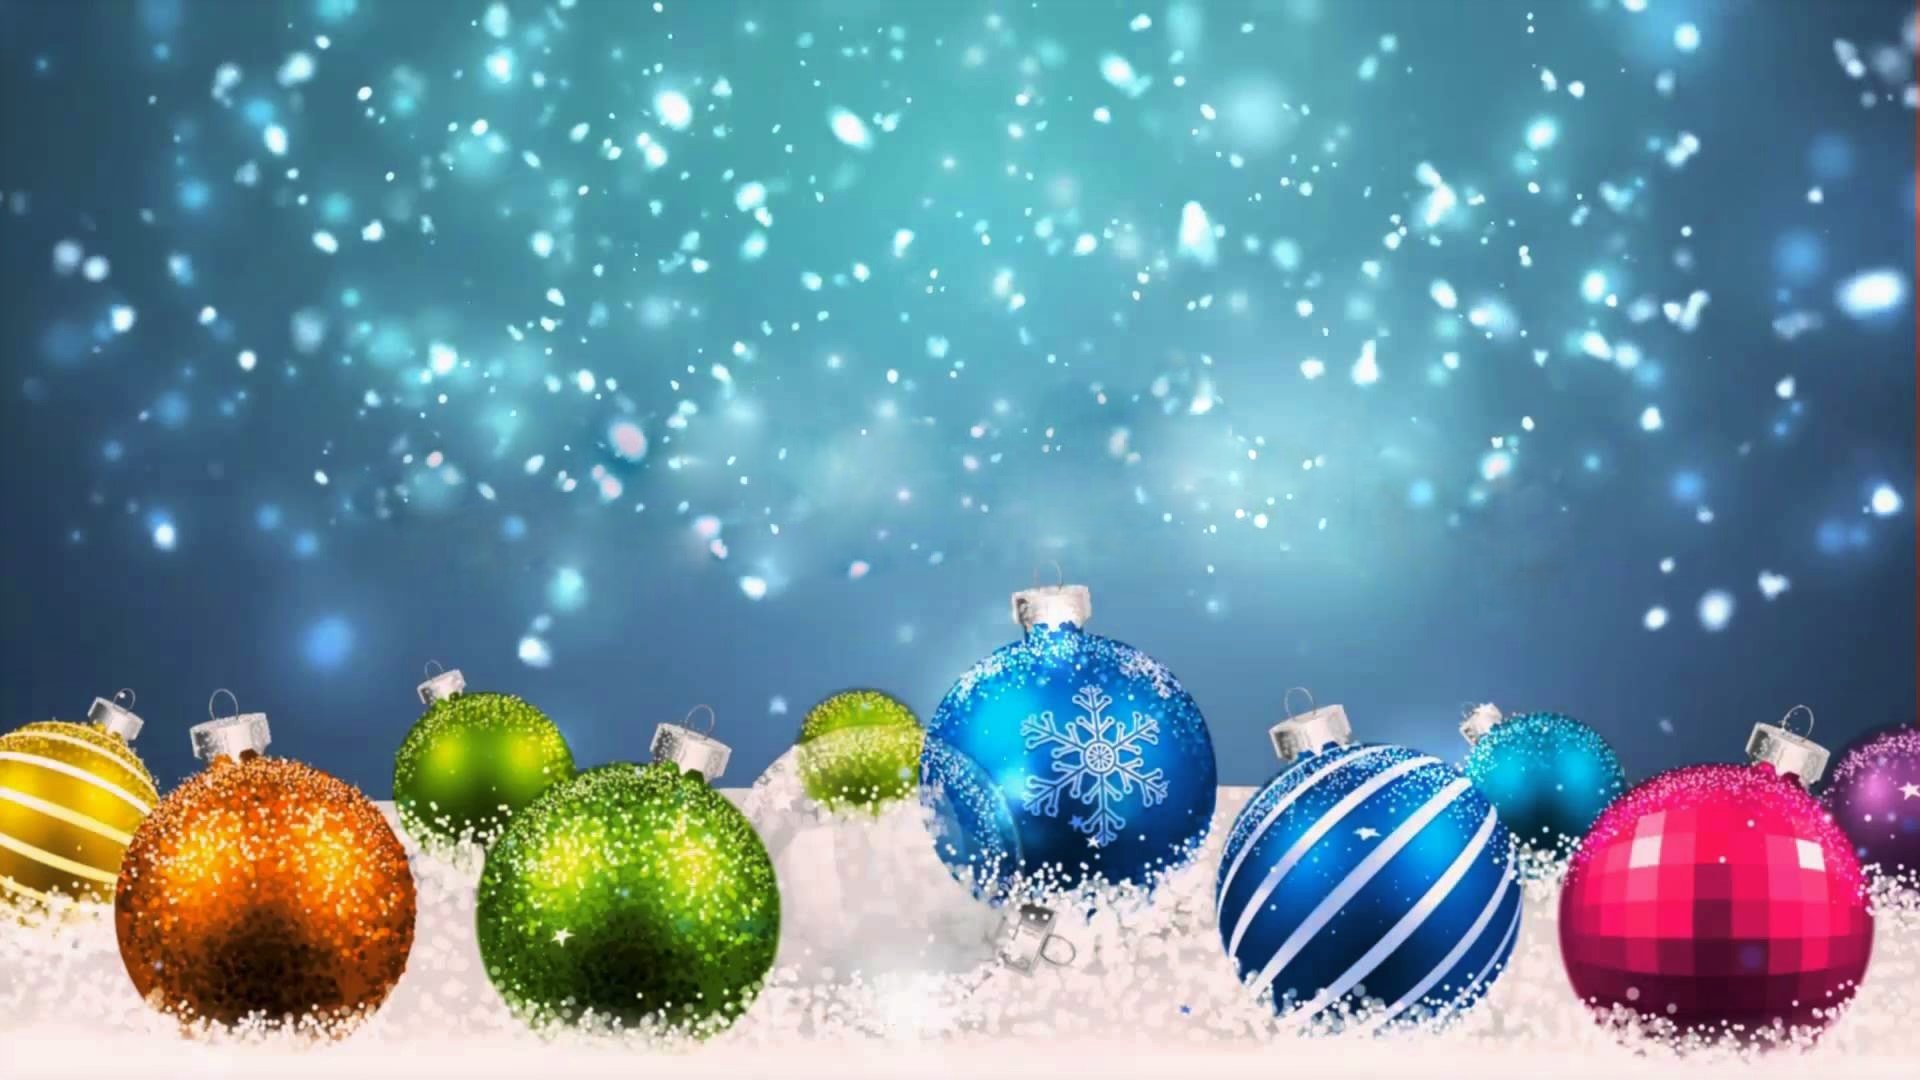 Christmas Ornaments HD Wallpaper | Background Image | 1920x1080 | ID